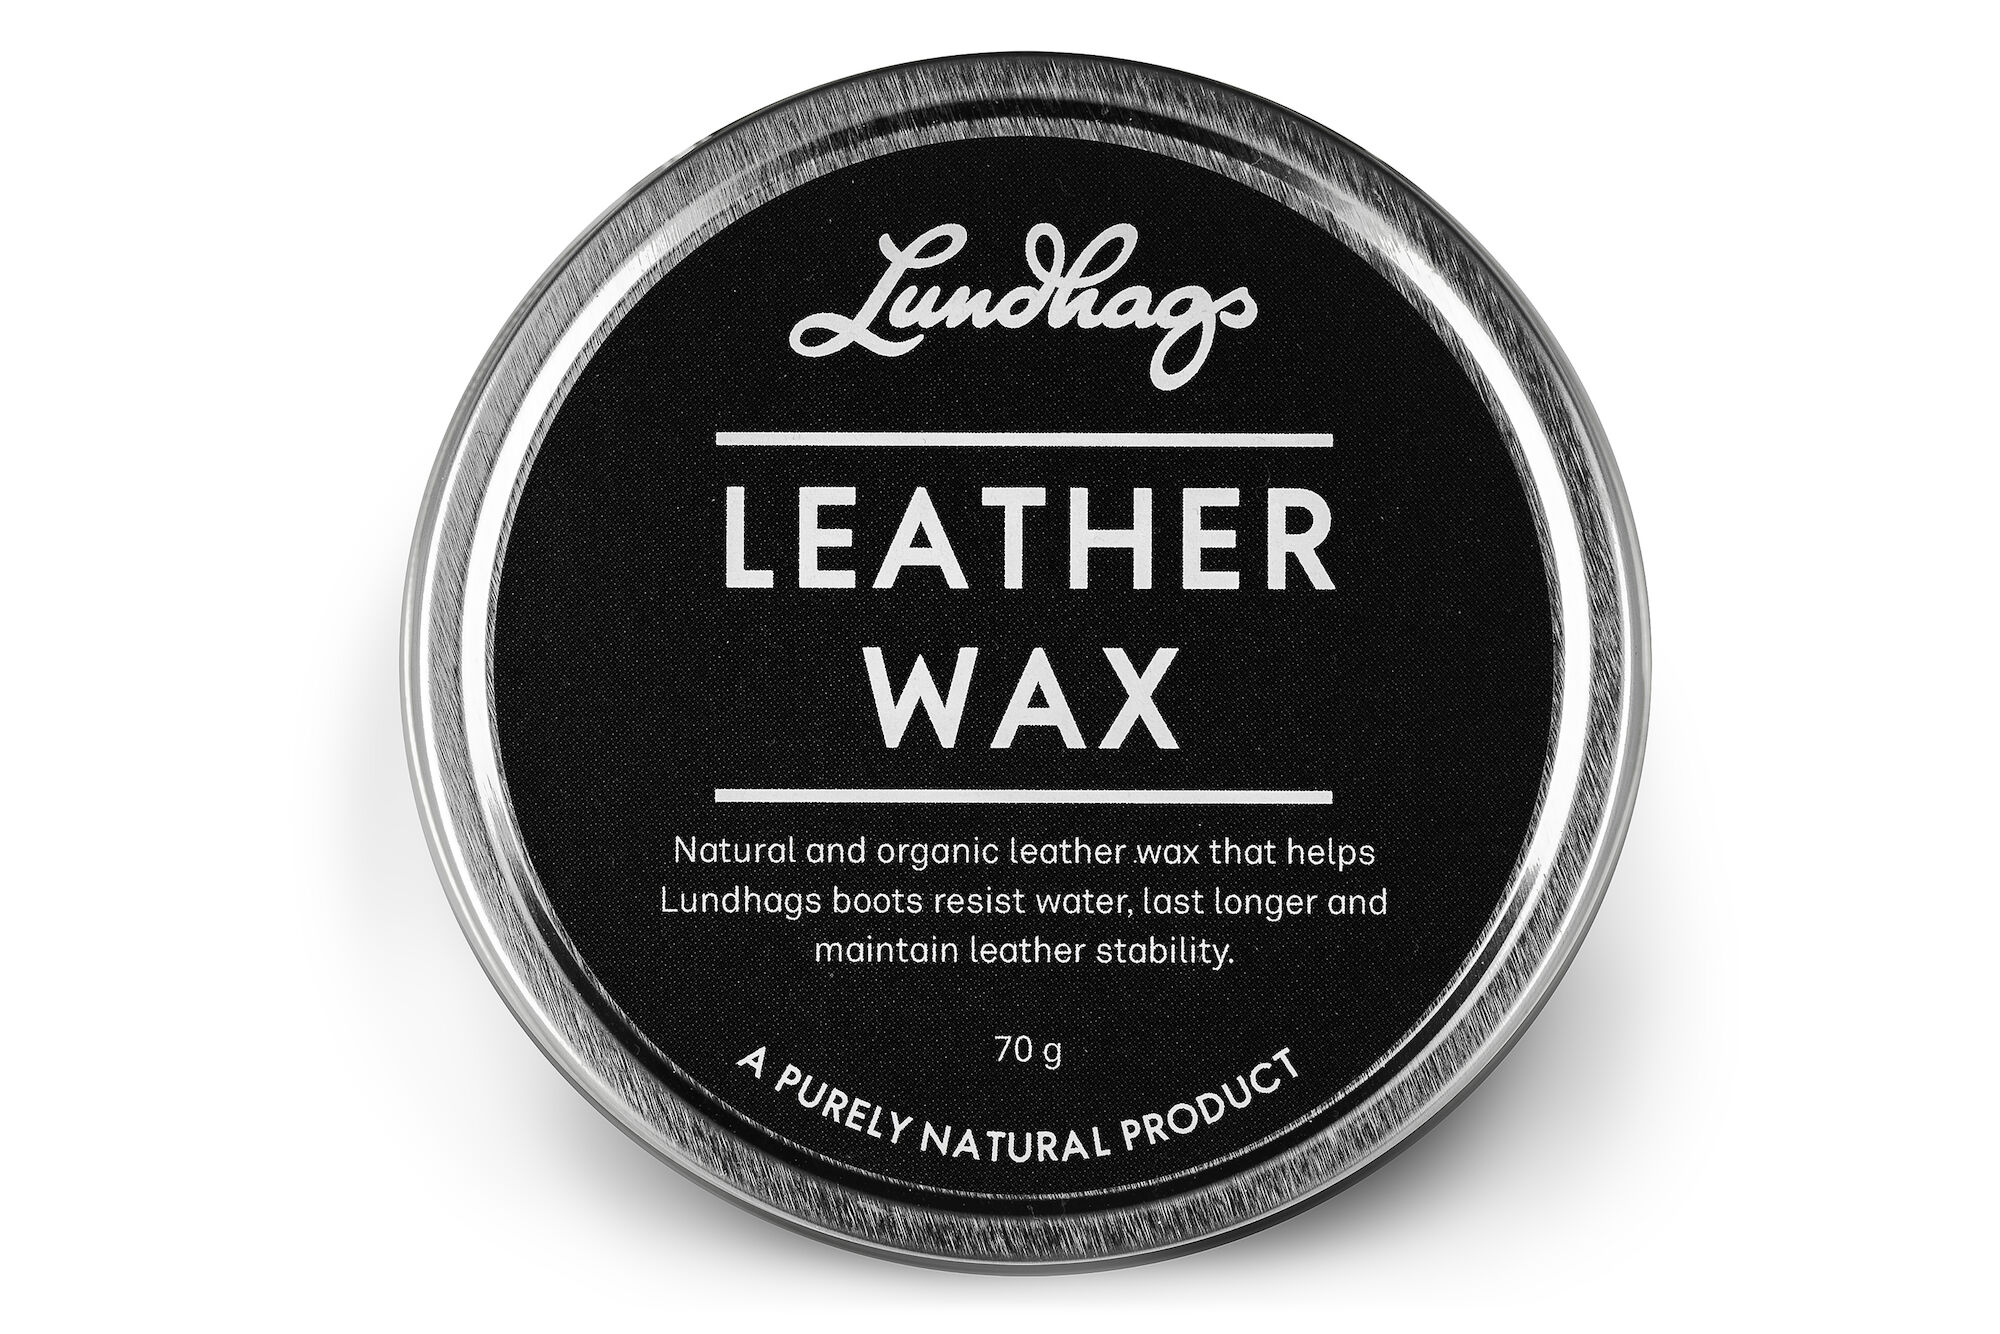 Lundhags Leather Wax Standard